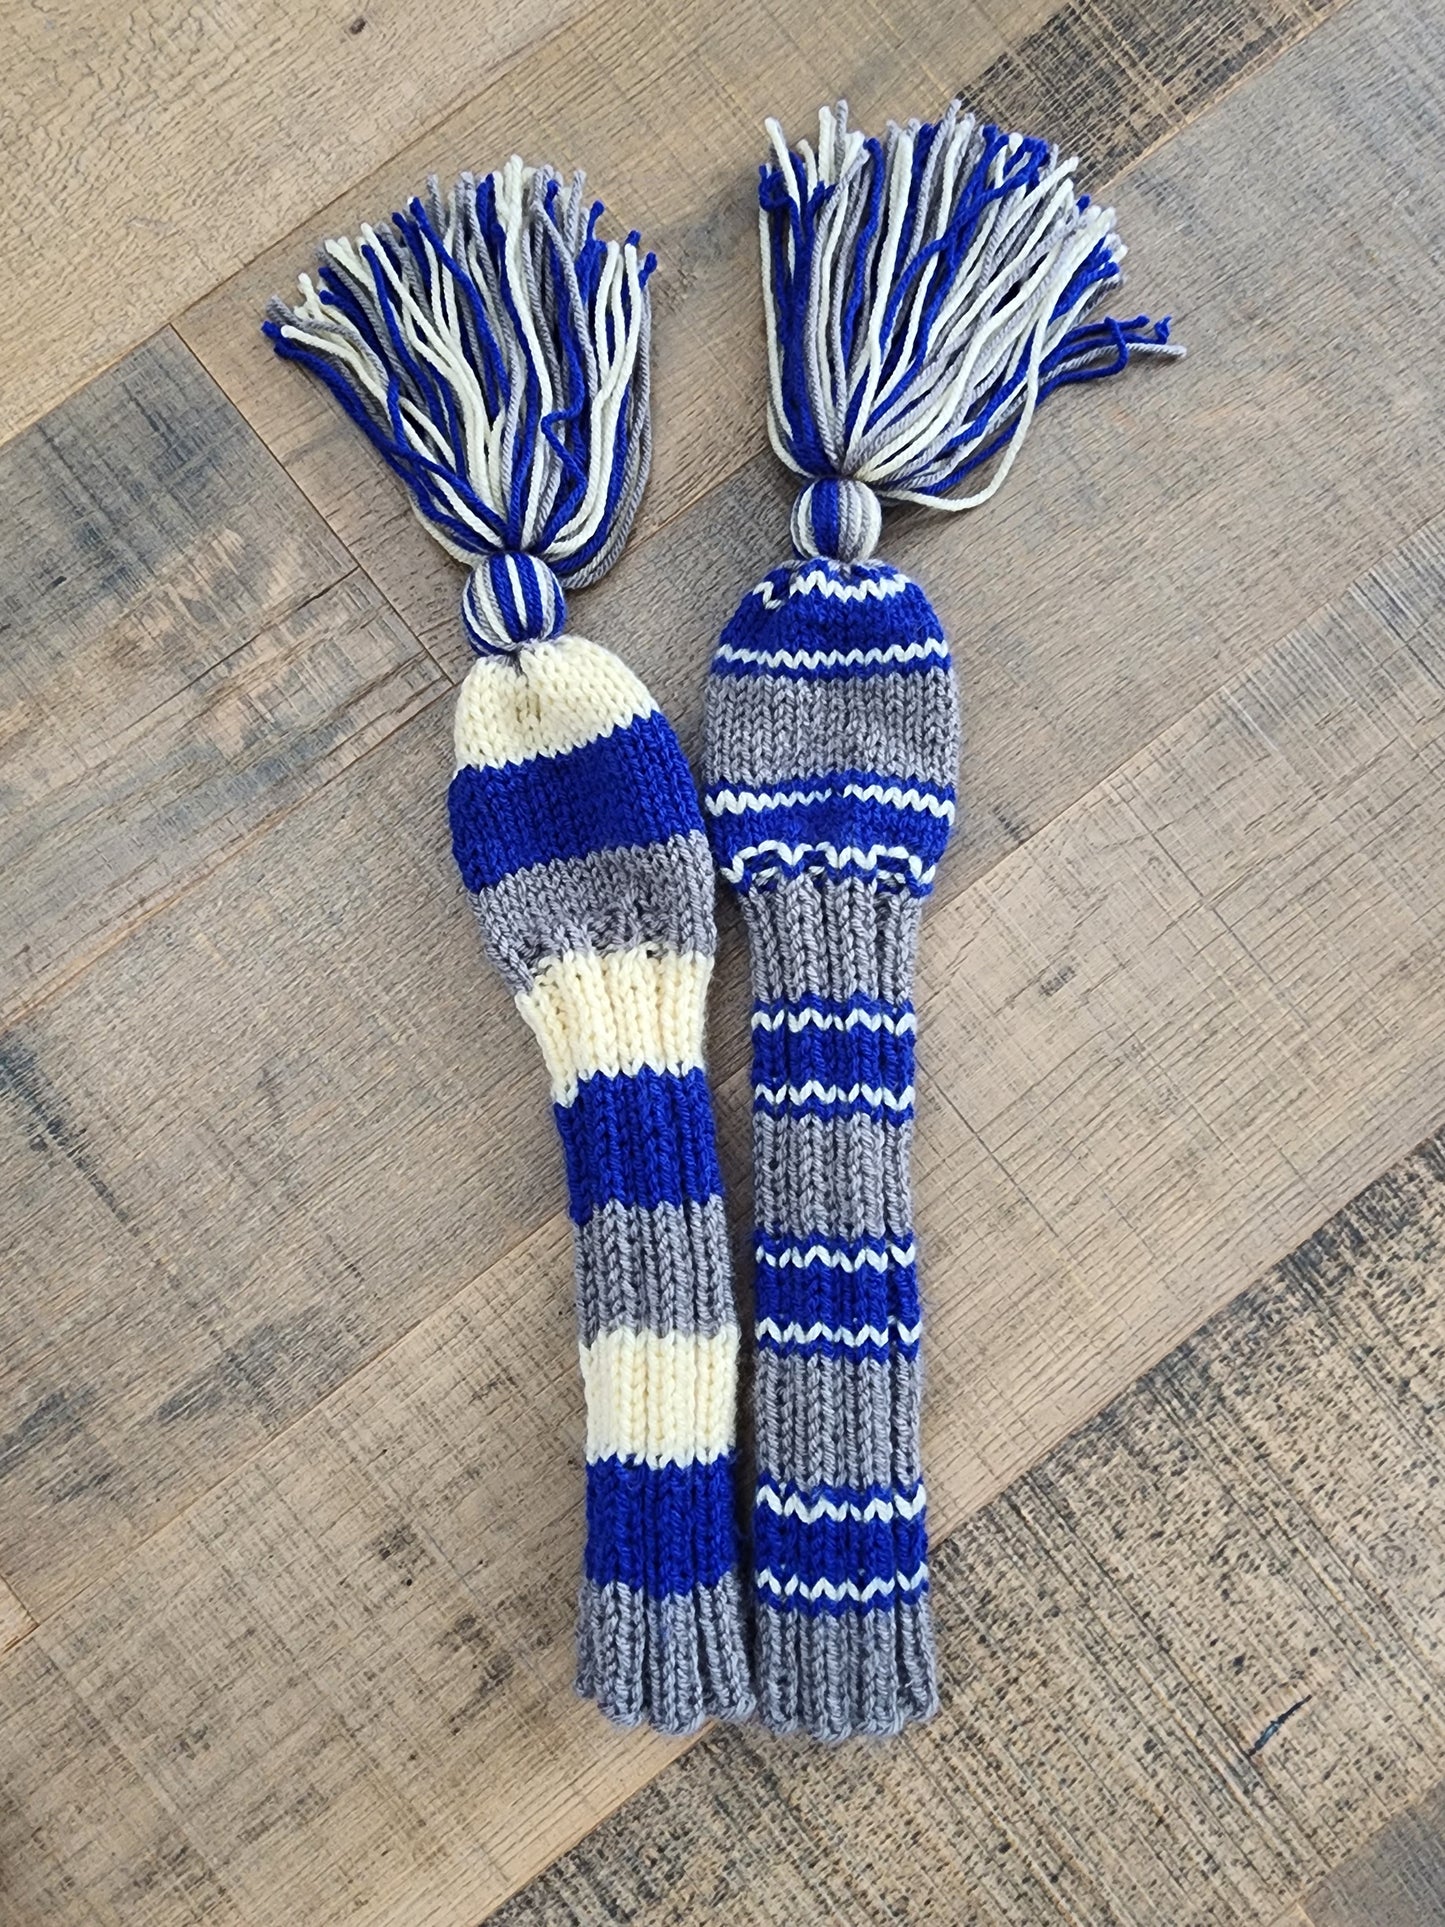 Hand Knit Golf Club Head Covers Retro-Vintage Blue, Yellow & Gray with Tassels for Fairway Woods - Austinknittylimits